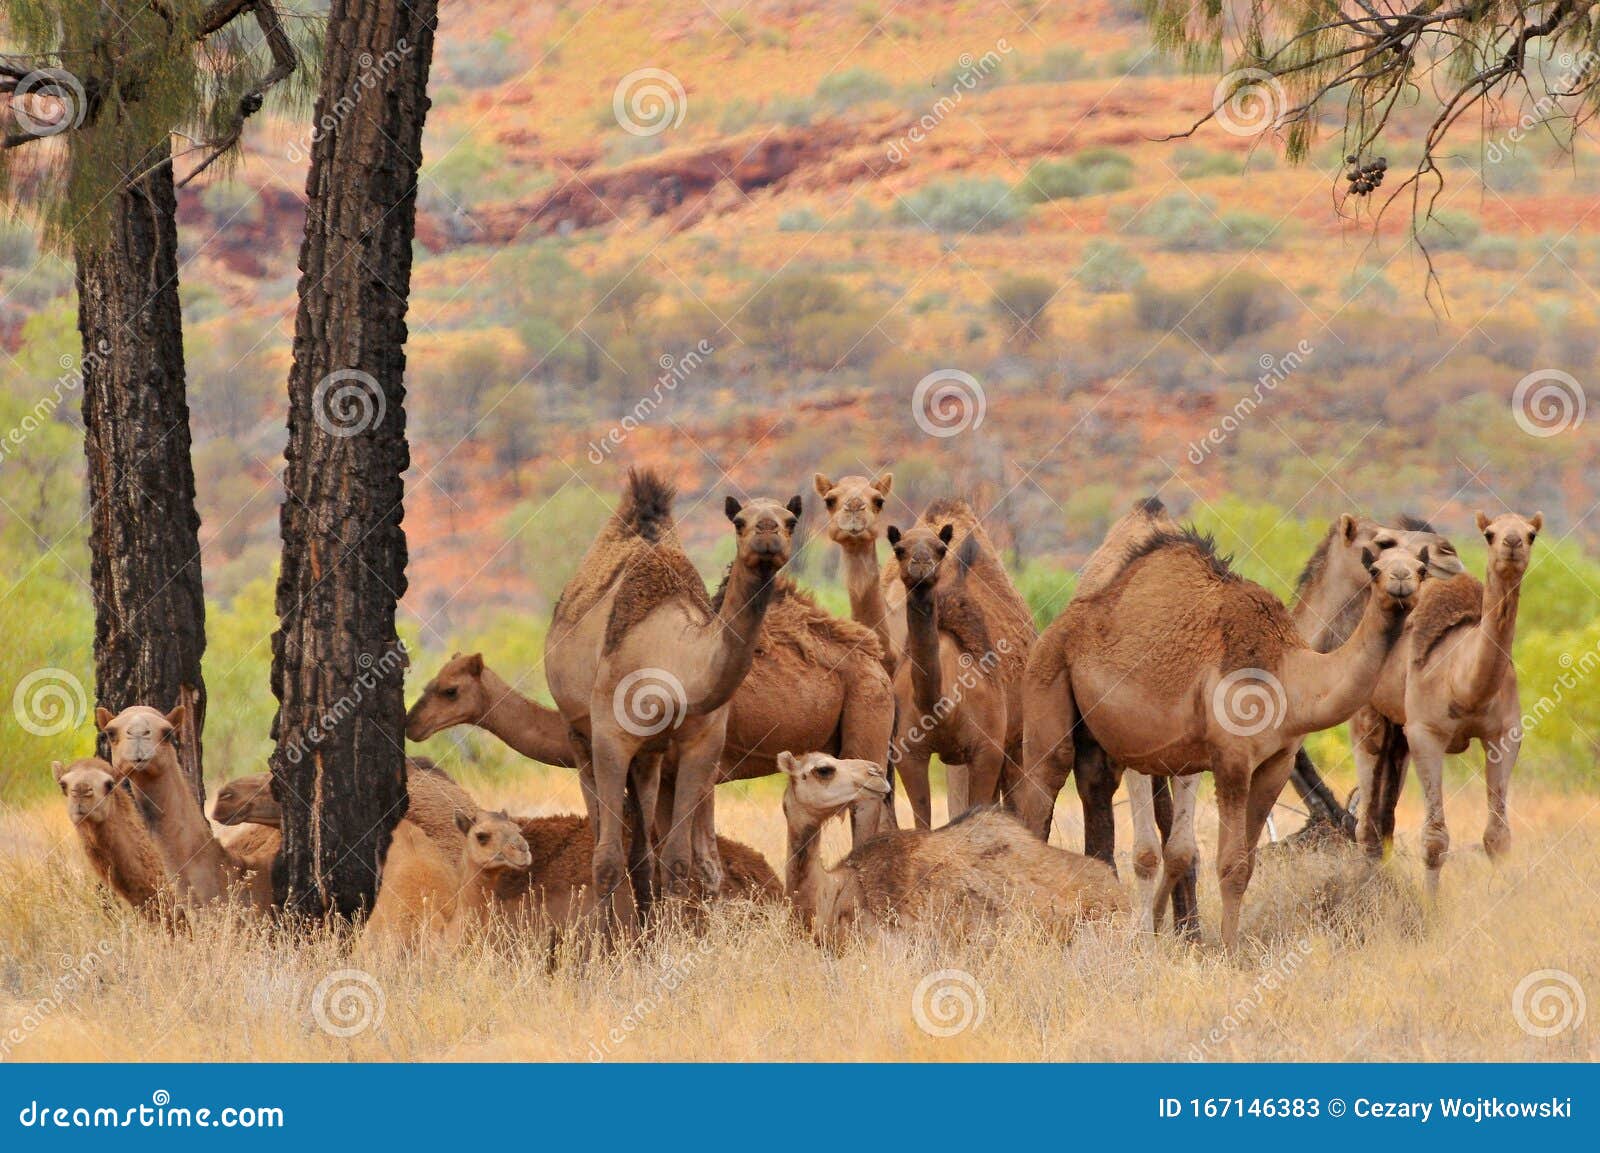 australian feral camels, mostly dromedaries camelus dromedarius imported into australia from british india and afghanistan.